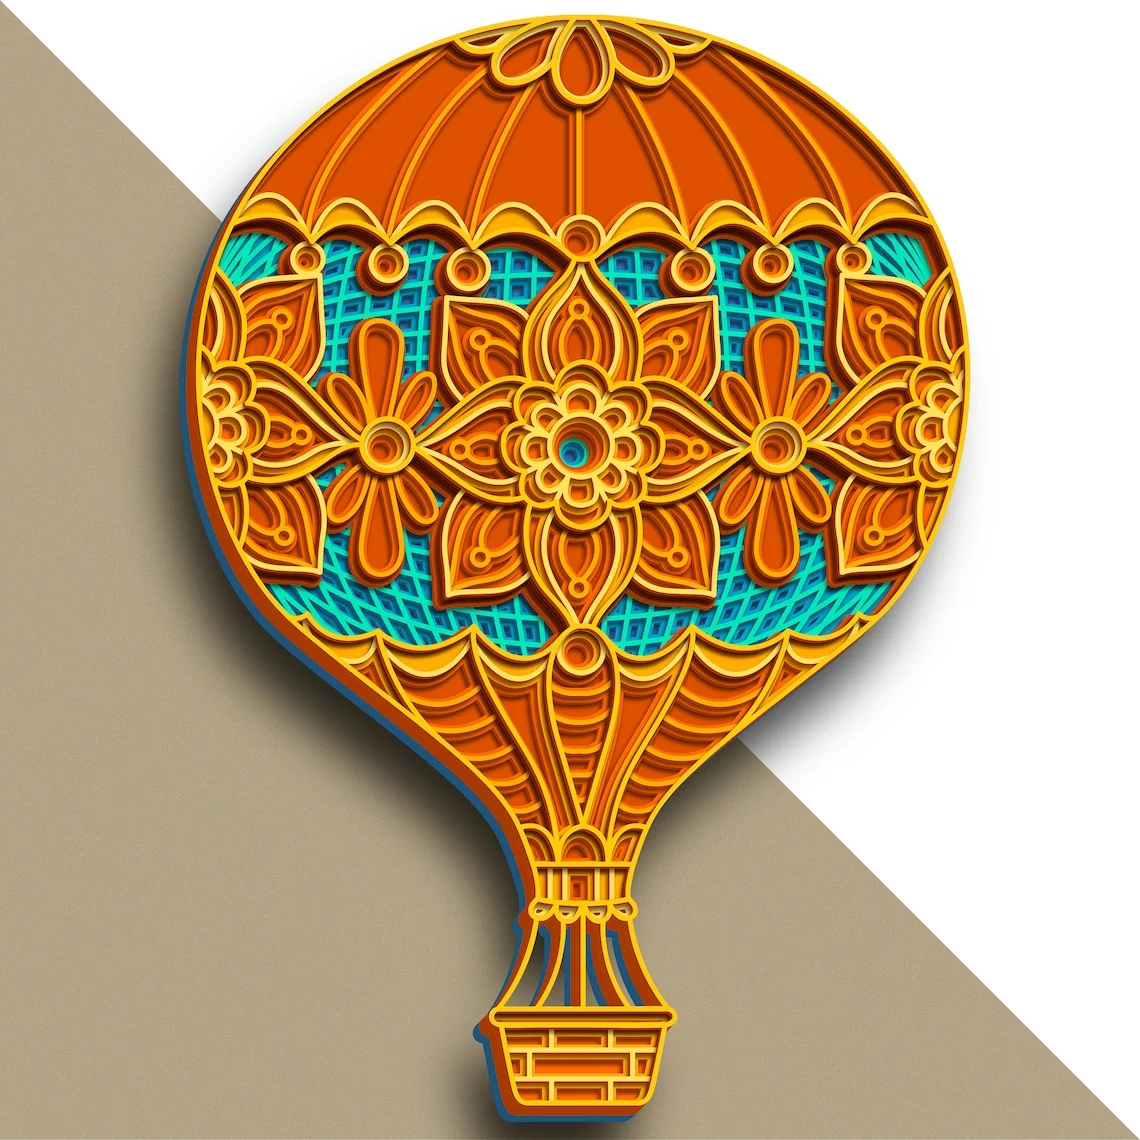 Multilayer Air Balloon Vector Model Home Decor Wall Art DWG DXF SVG AI EPS File for Laser Cutter and Cricut Maker harbor freight woodworking bench